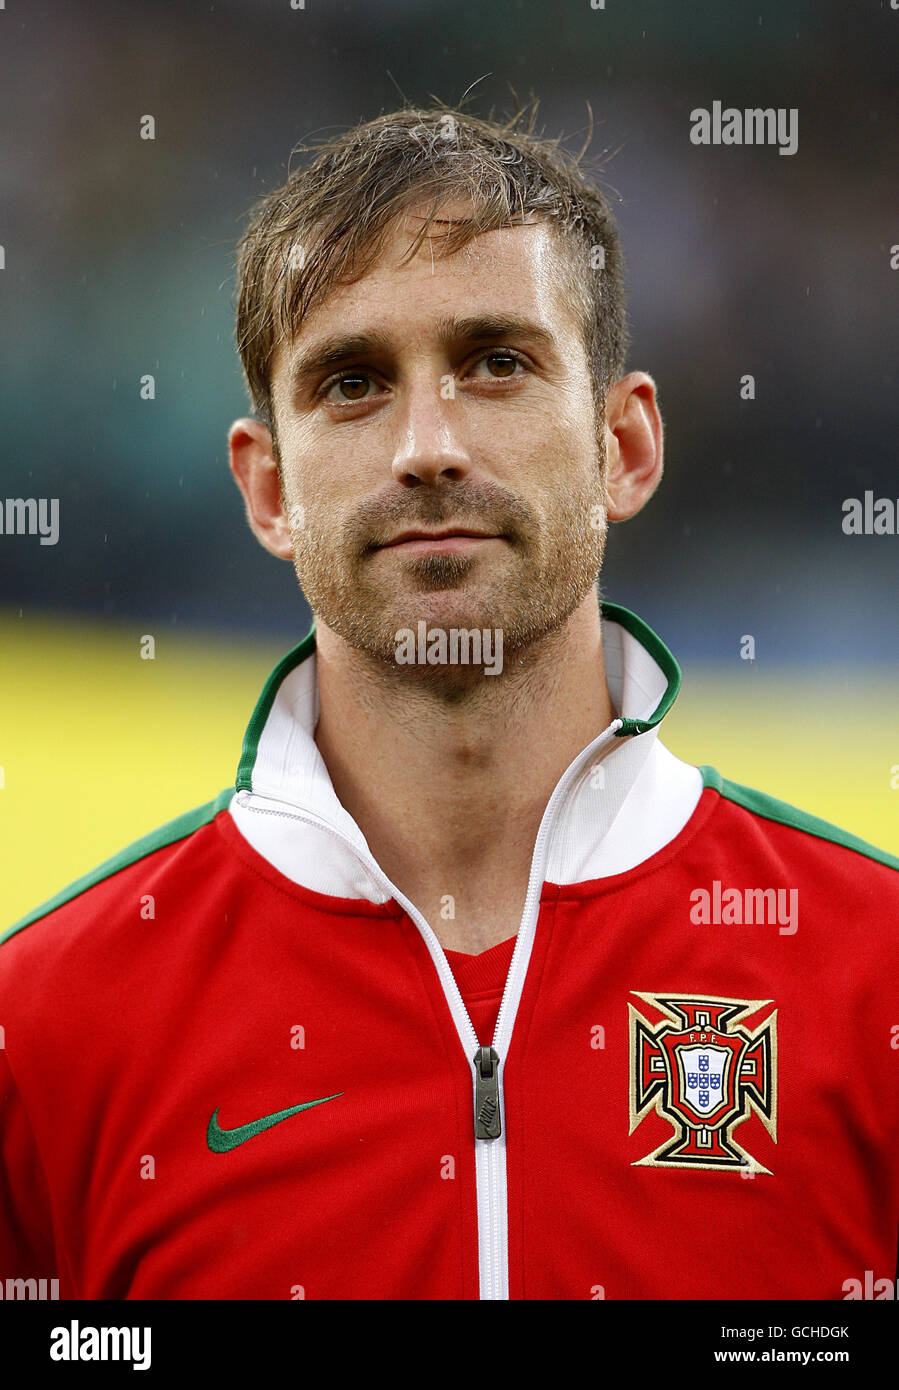 Soccer - 2010 FIFA World Cup South Africa - Group G - Portugal v North Korea - Green Point Stadium. Jose Raul Meireles, Portugal Stock Photo